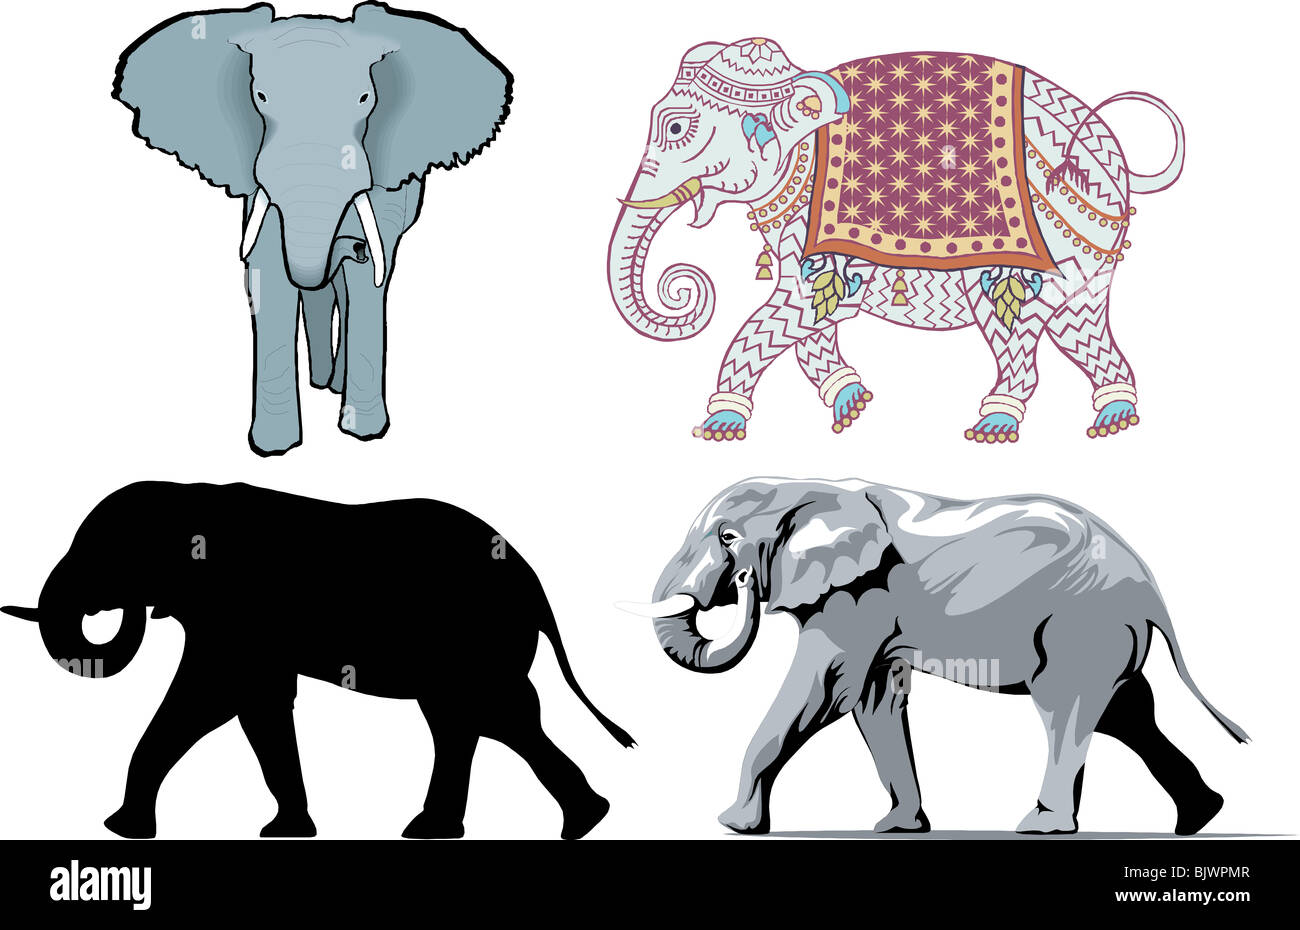 Vector Illustration of 4 different styles of Elephants. Stock Photo